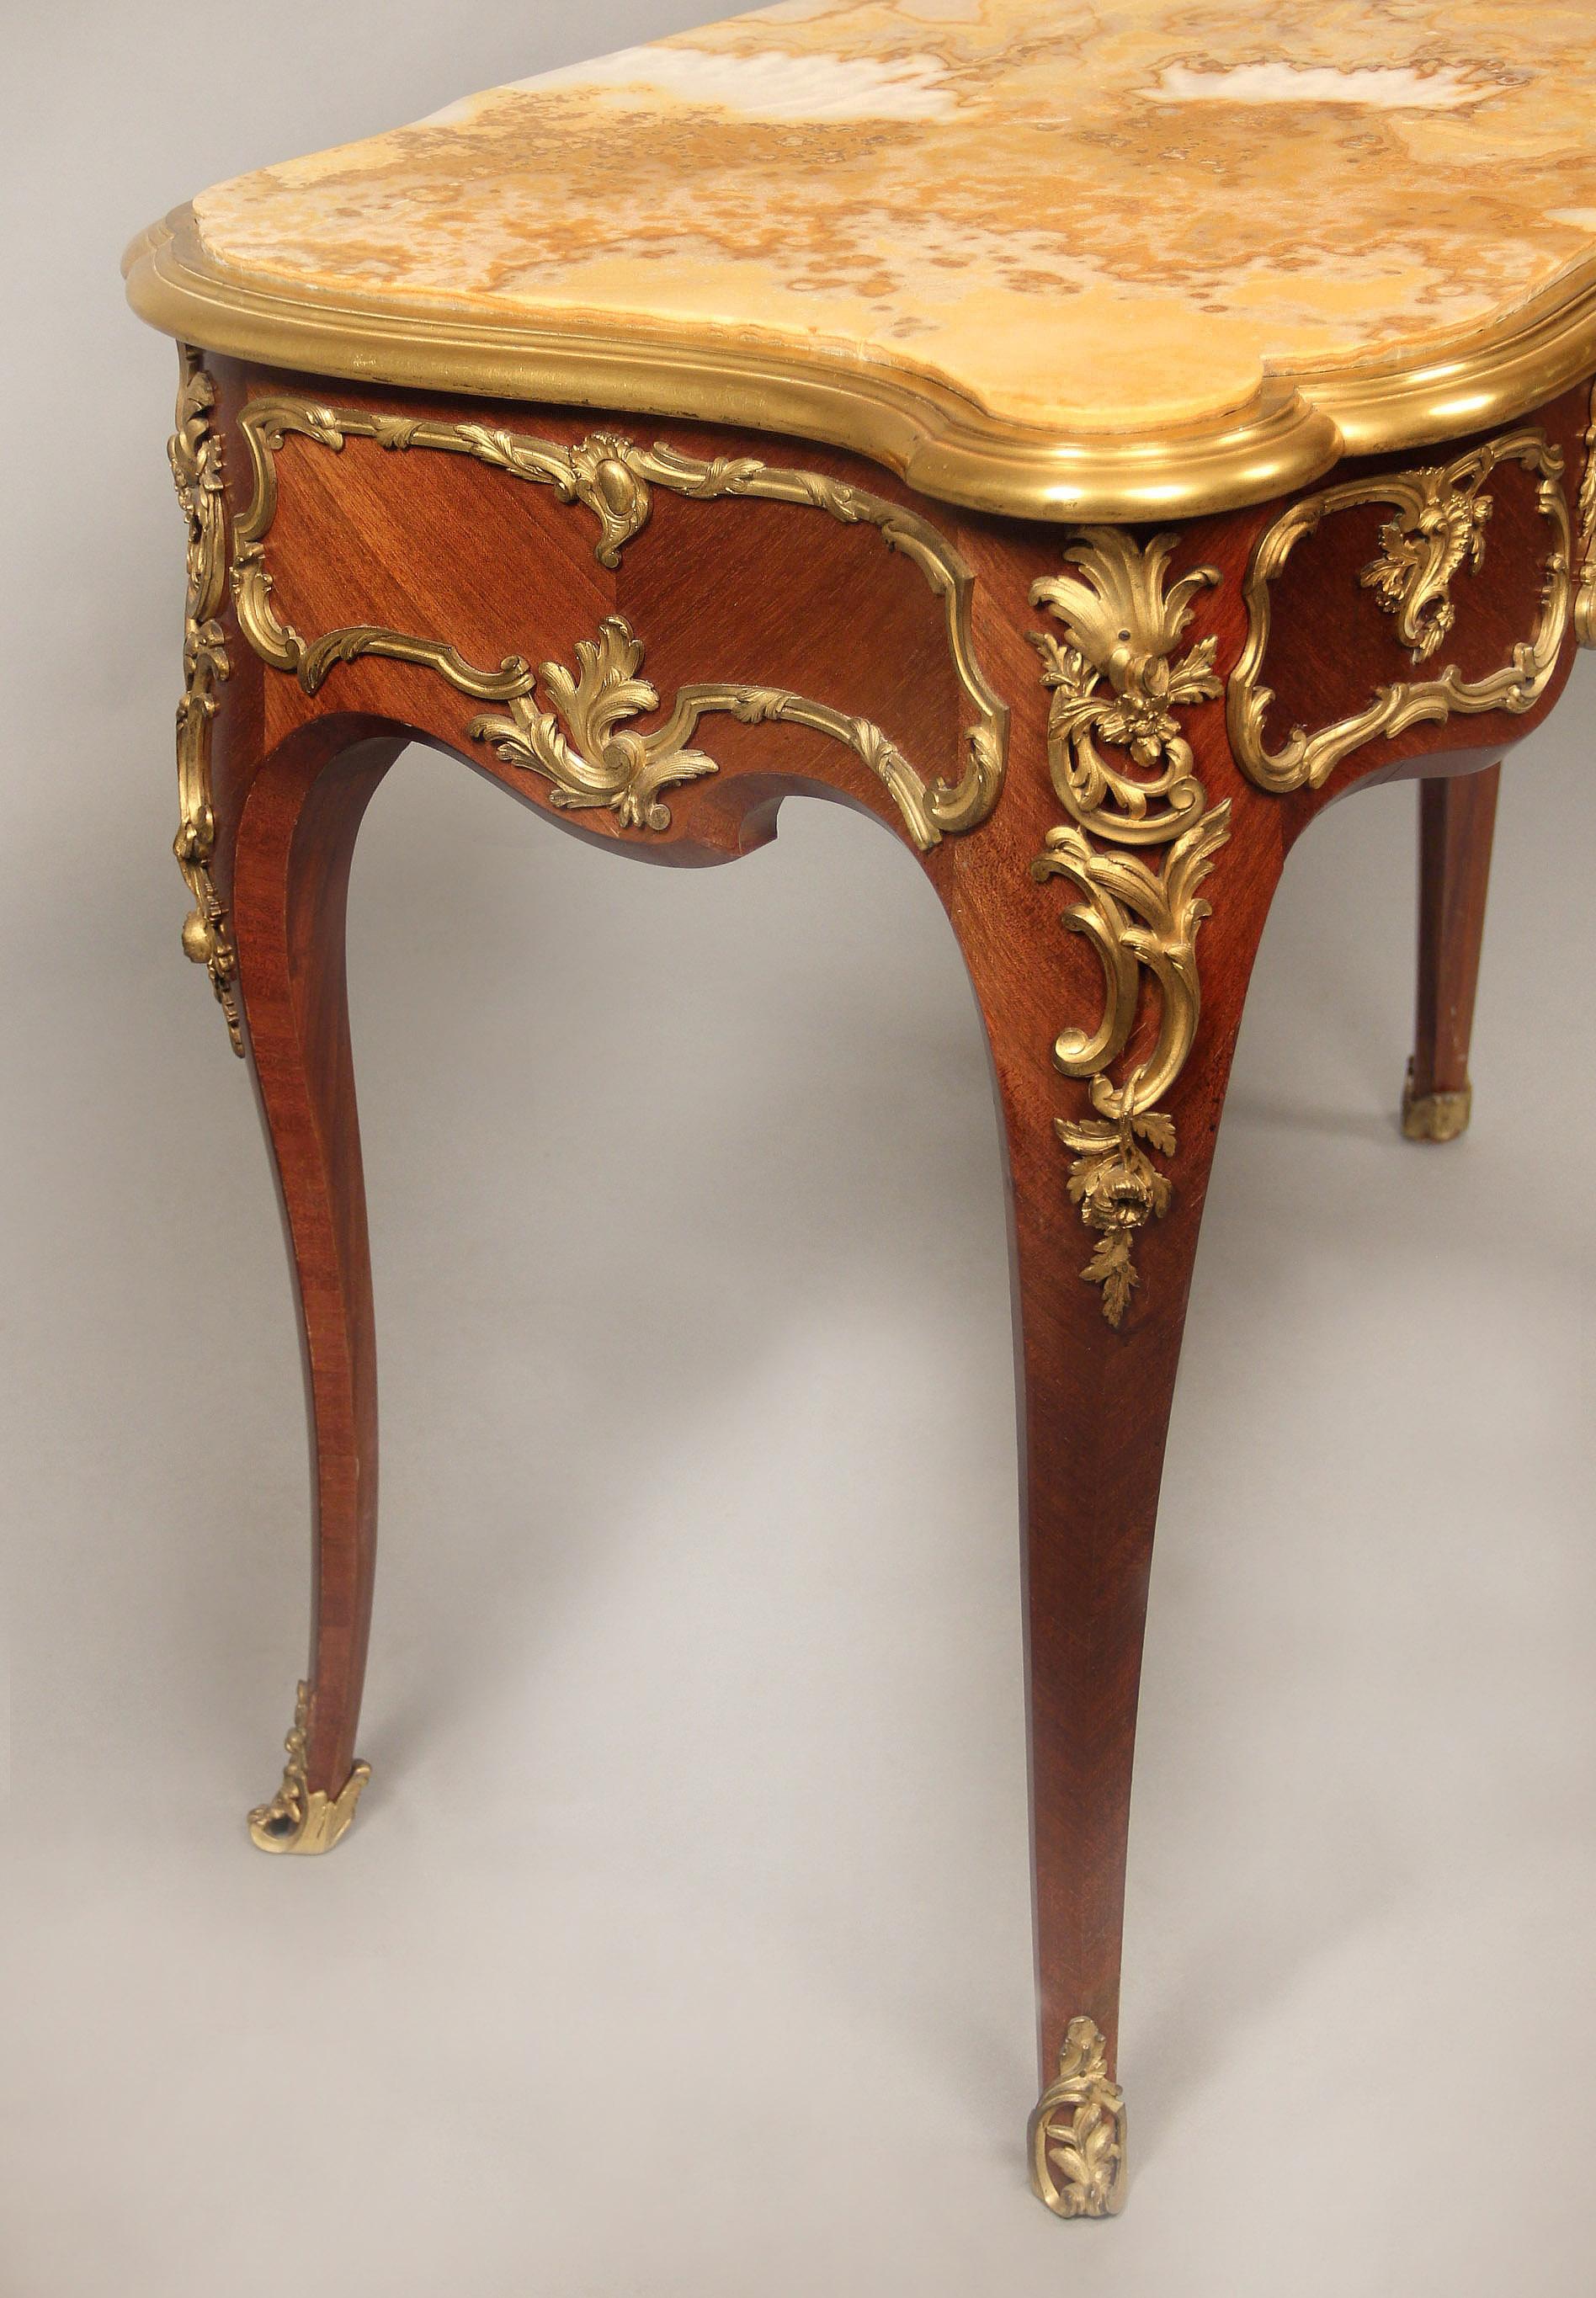 French Interesting Late 19th Century Gilt Bronze Mounted Onyx Top Table By Henry Dasson For Sale